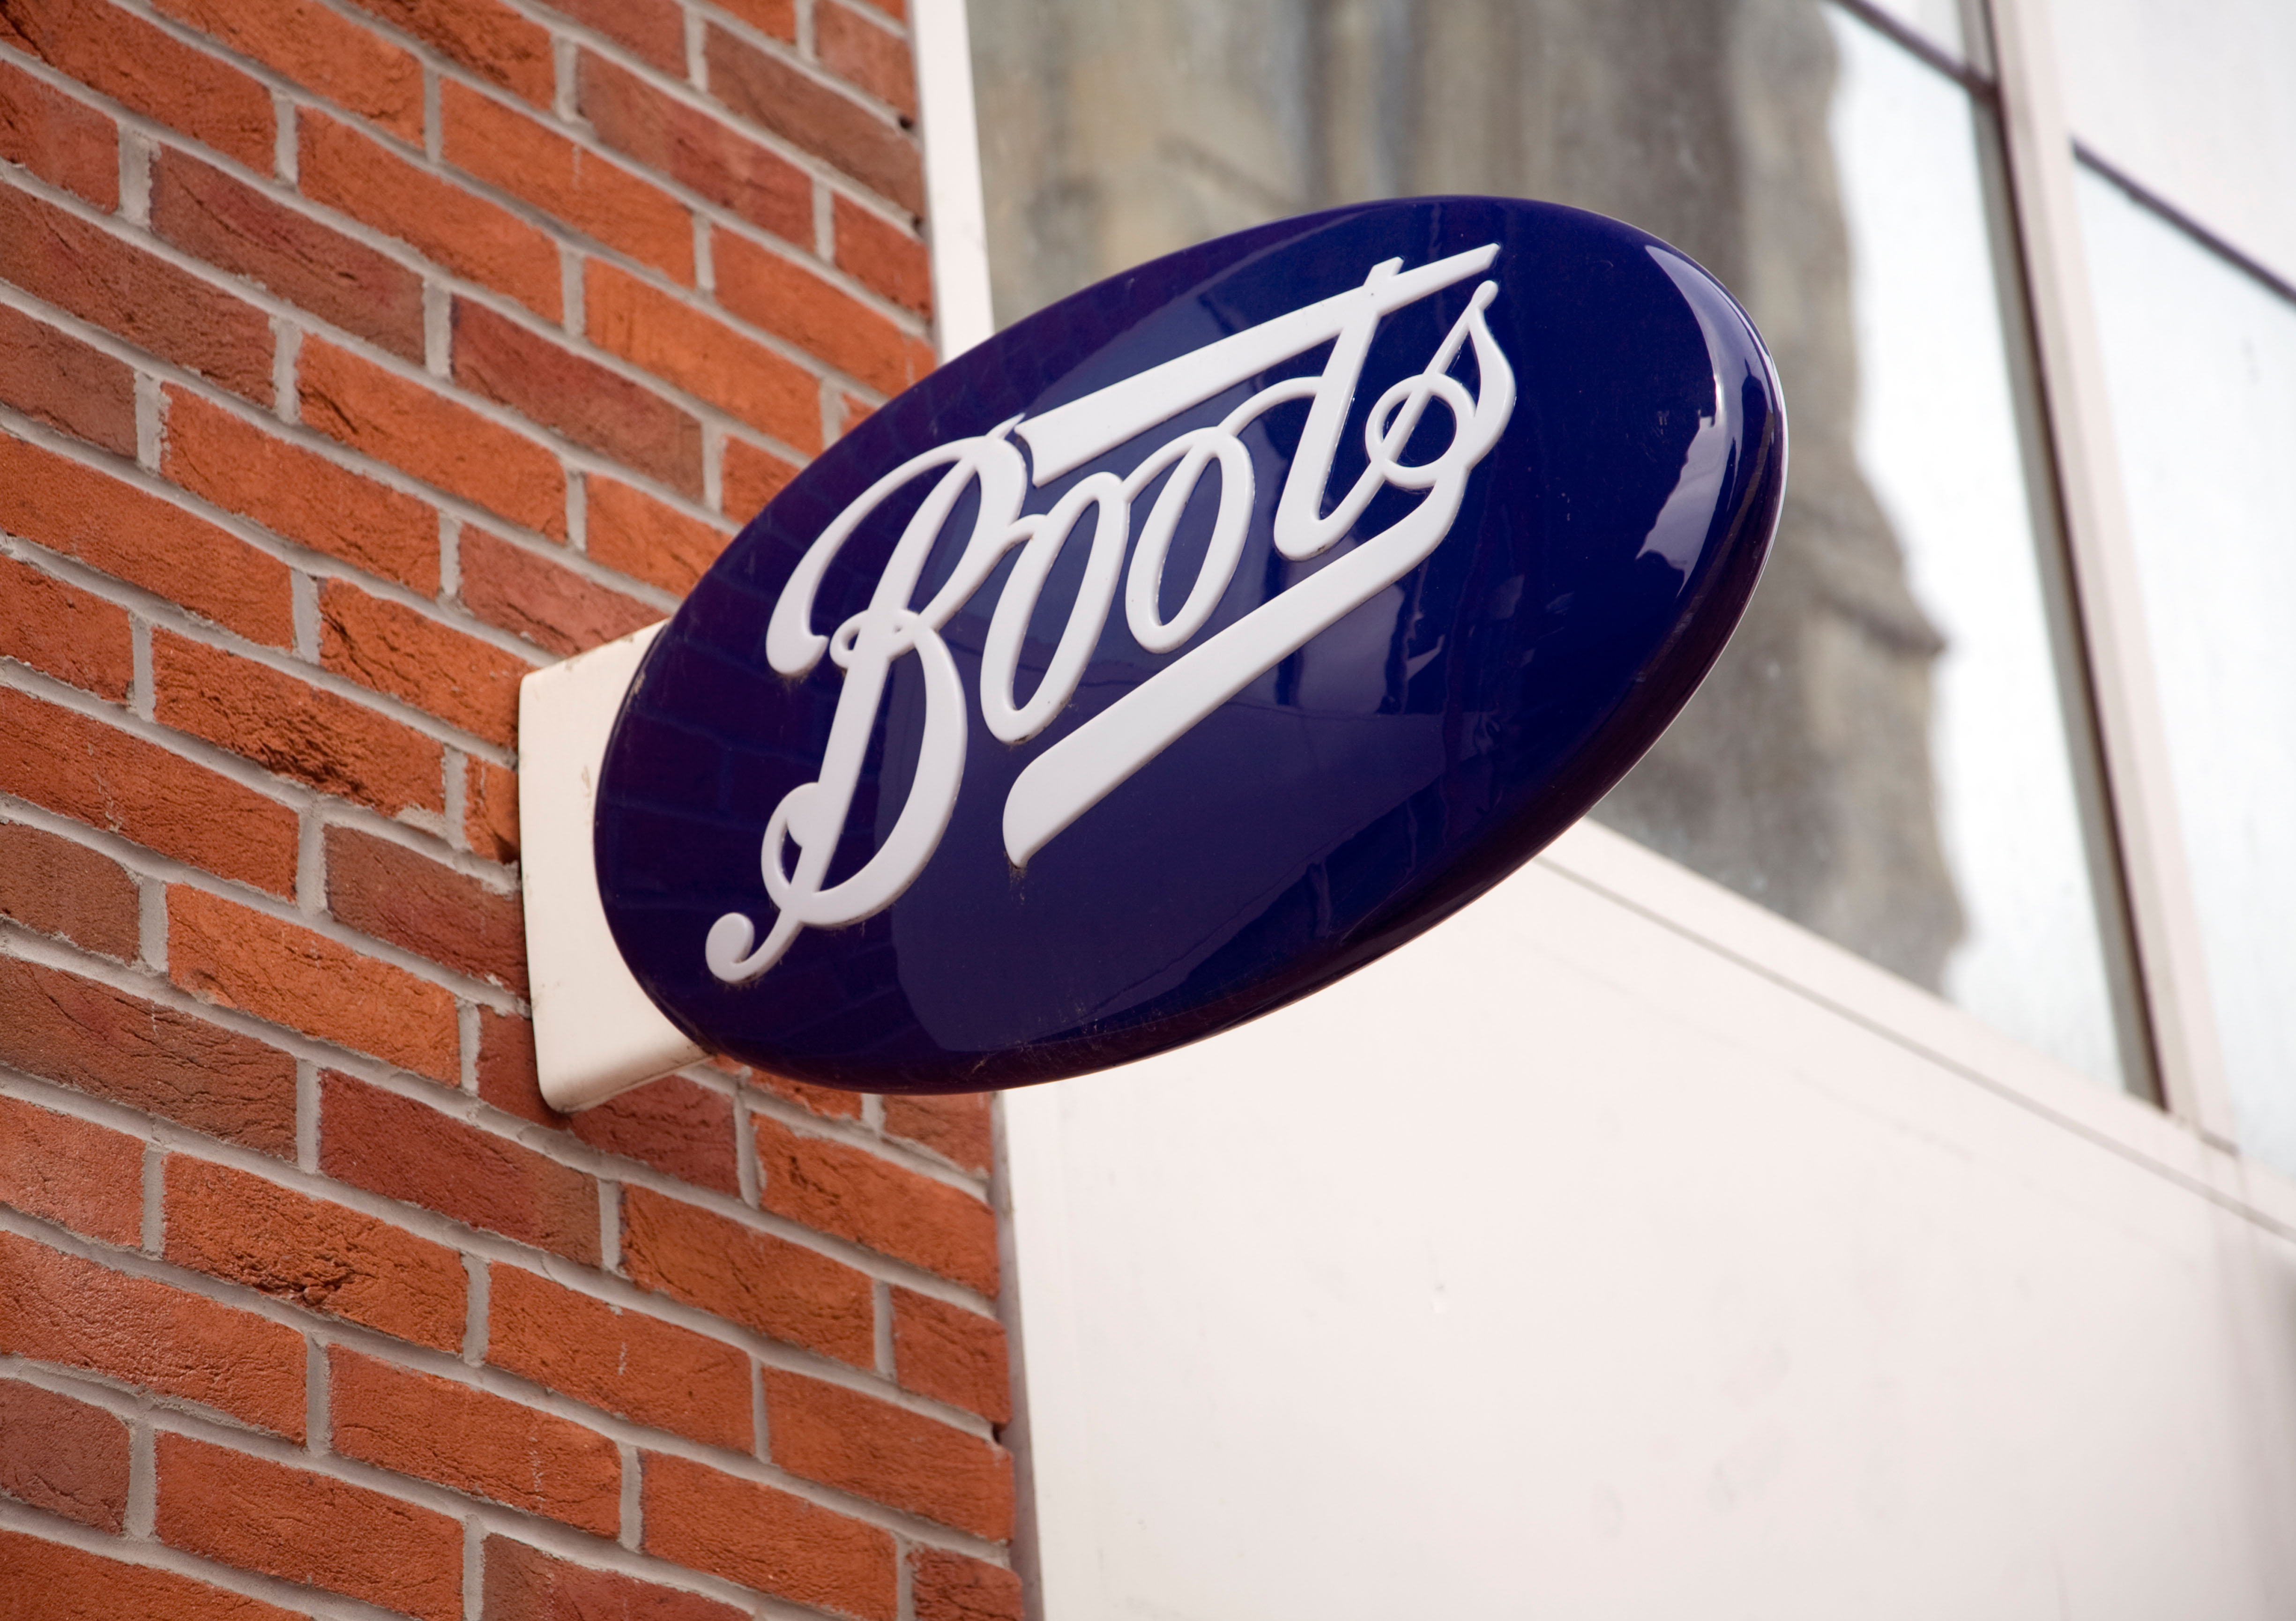 Boots sign on wall